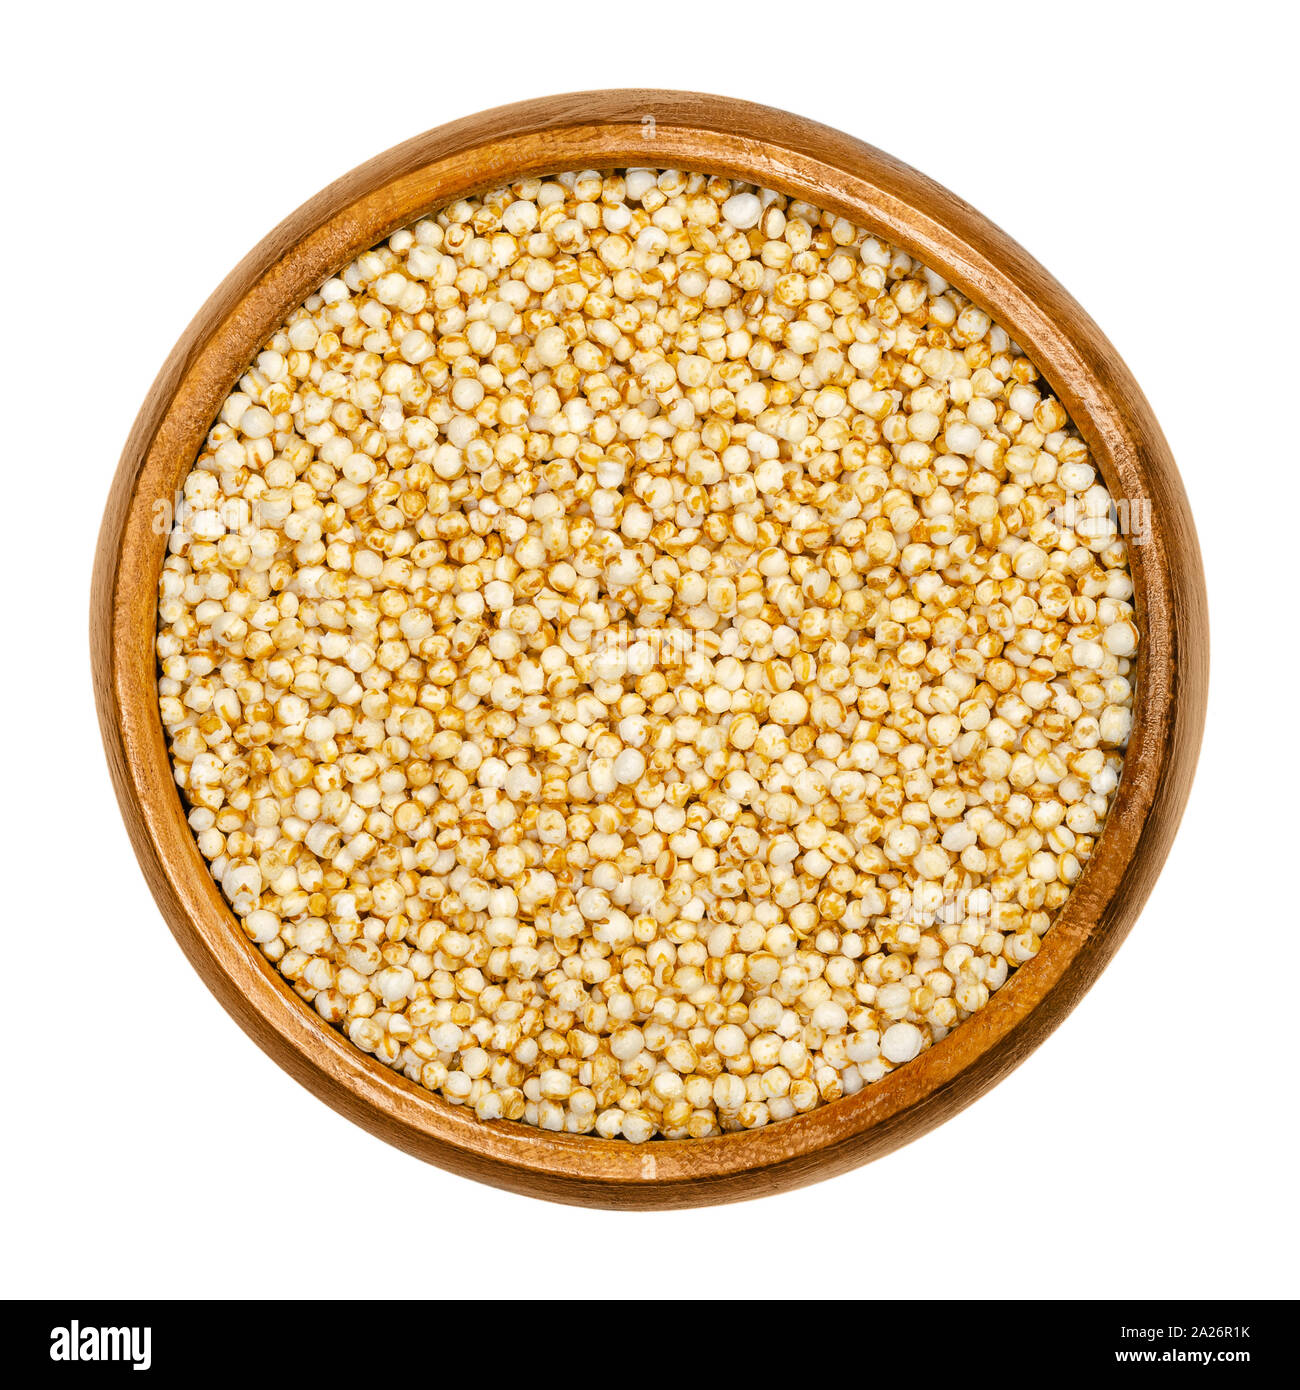 Puffed quinoa in wooden bowl. Popped seeds of Chenopodium quinoa, a pseudocereal, used like breakfast cereals and in the form of rice cakes. Stock Photo